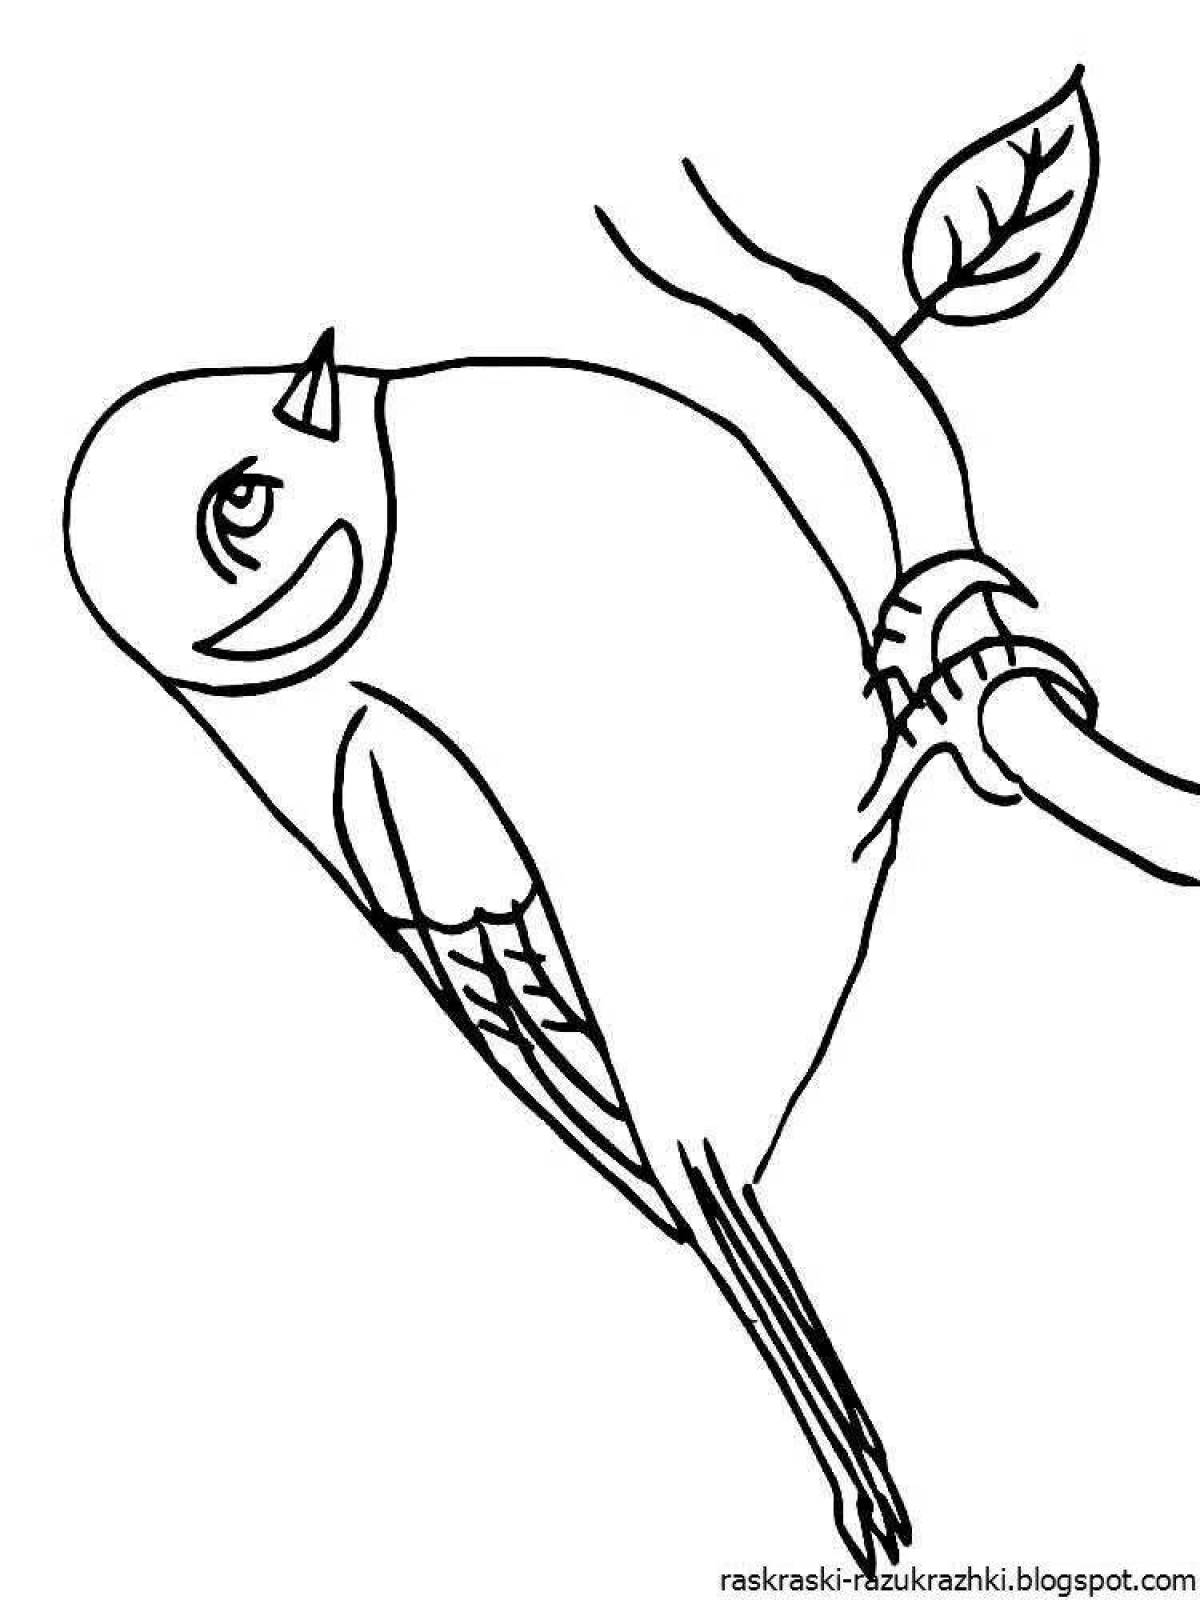 Exquisite bullfinch coloring book for kids 6-7 years old